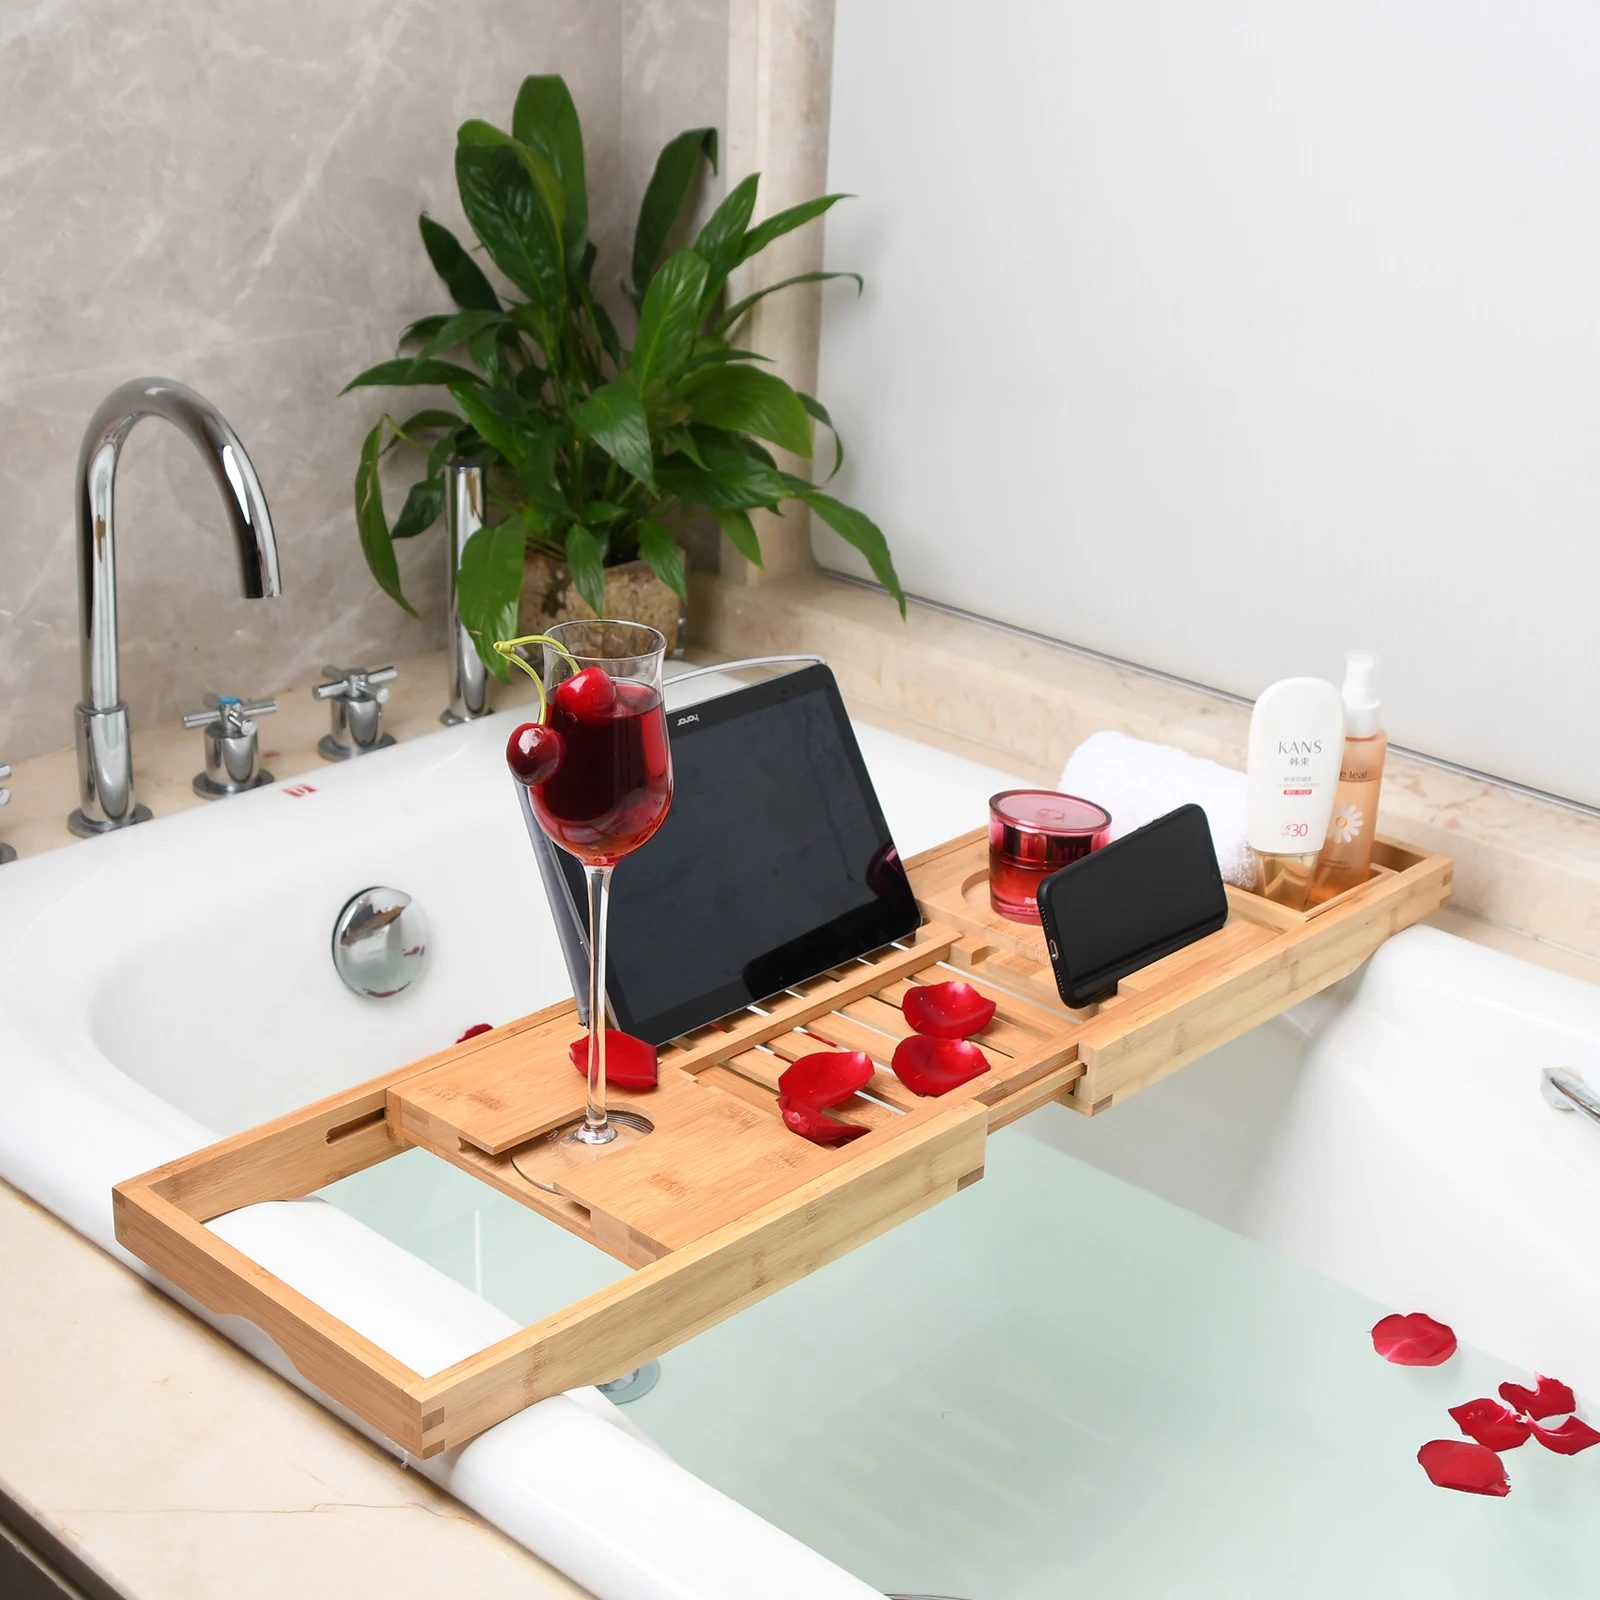 Bamboo with Natural Finish Books & Tablets Bathroom Accessories Set Wooden Bath Tray mDesign Bamboo Bath Rack with Reading Tray for Wine 